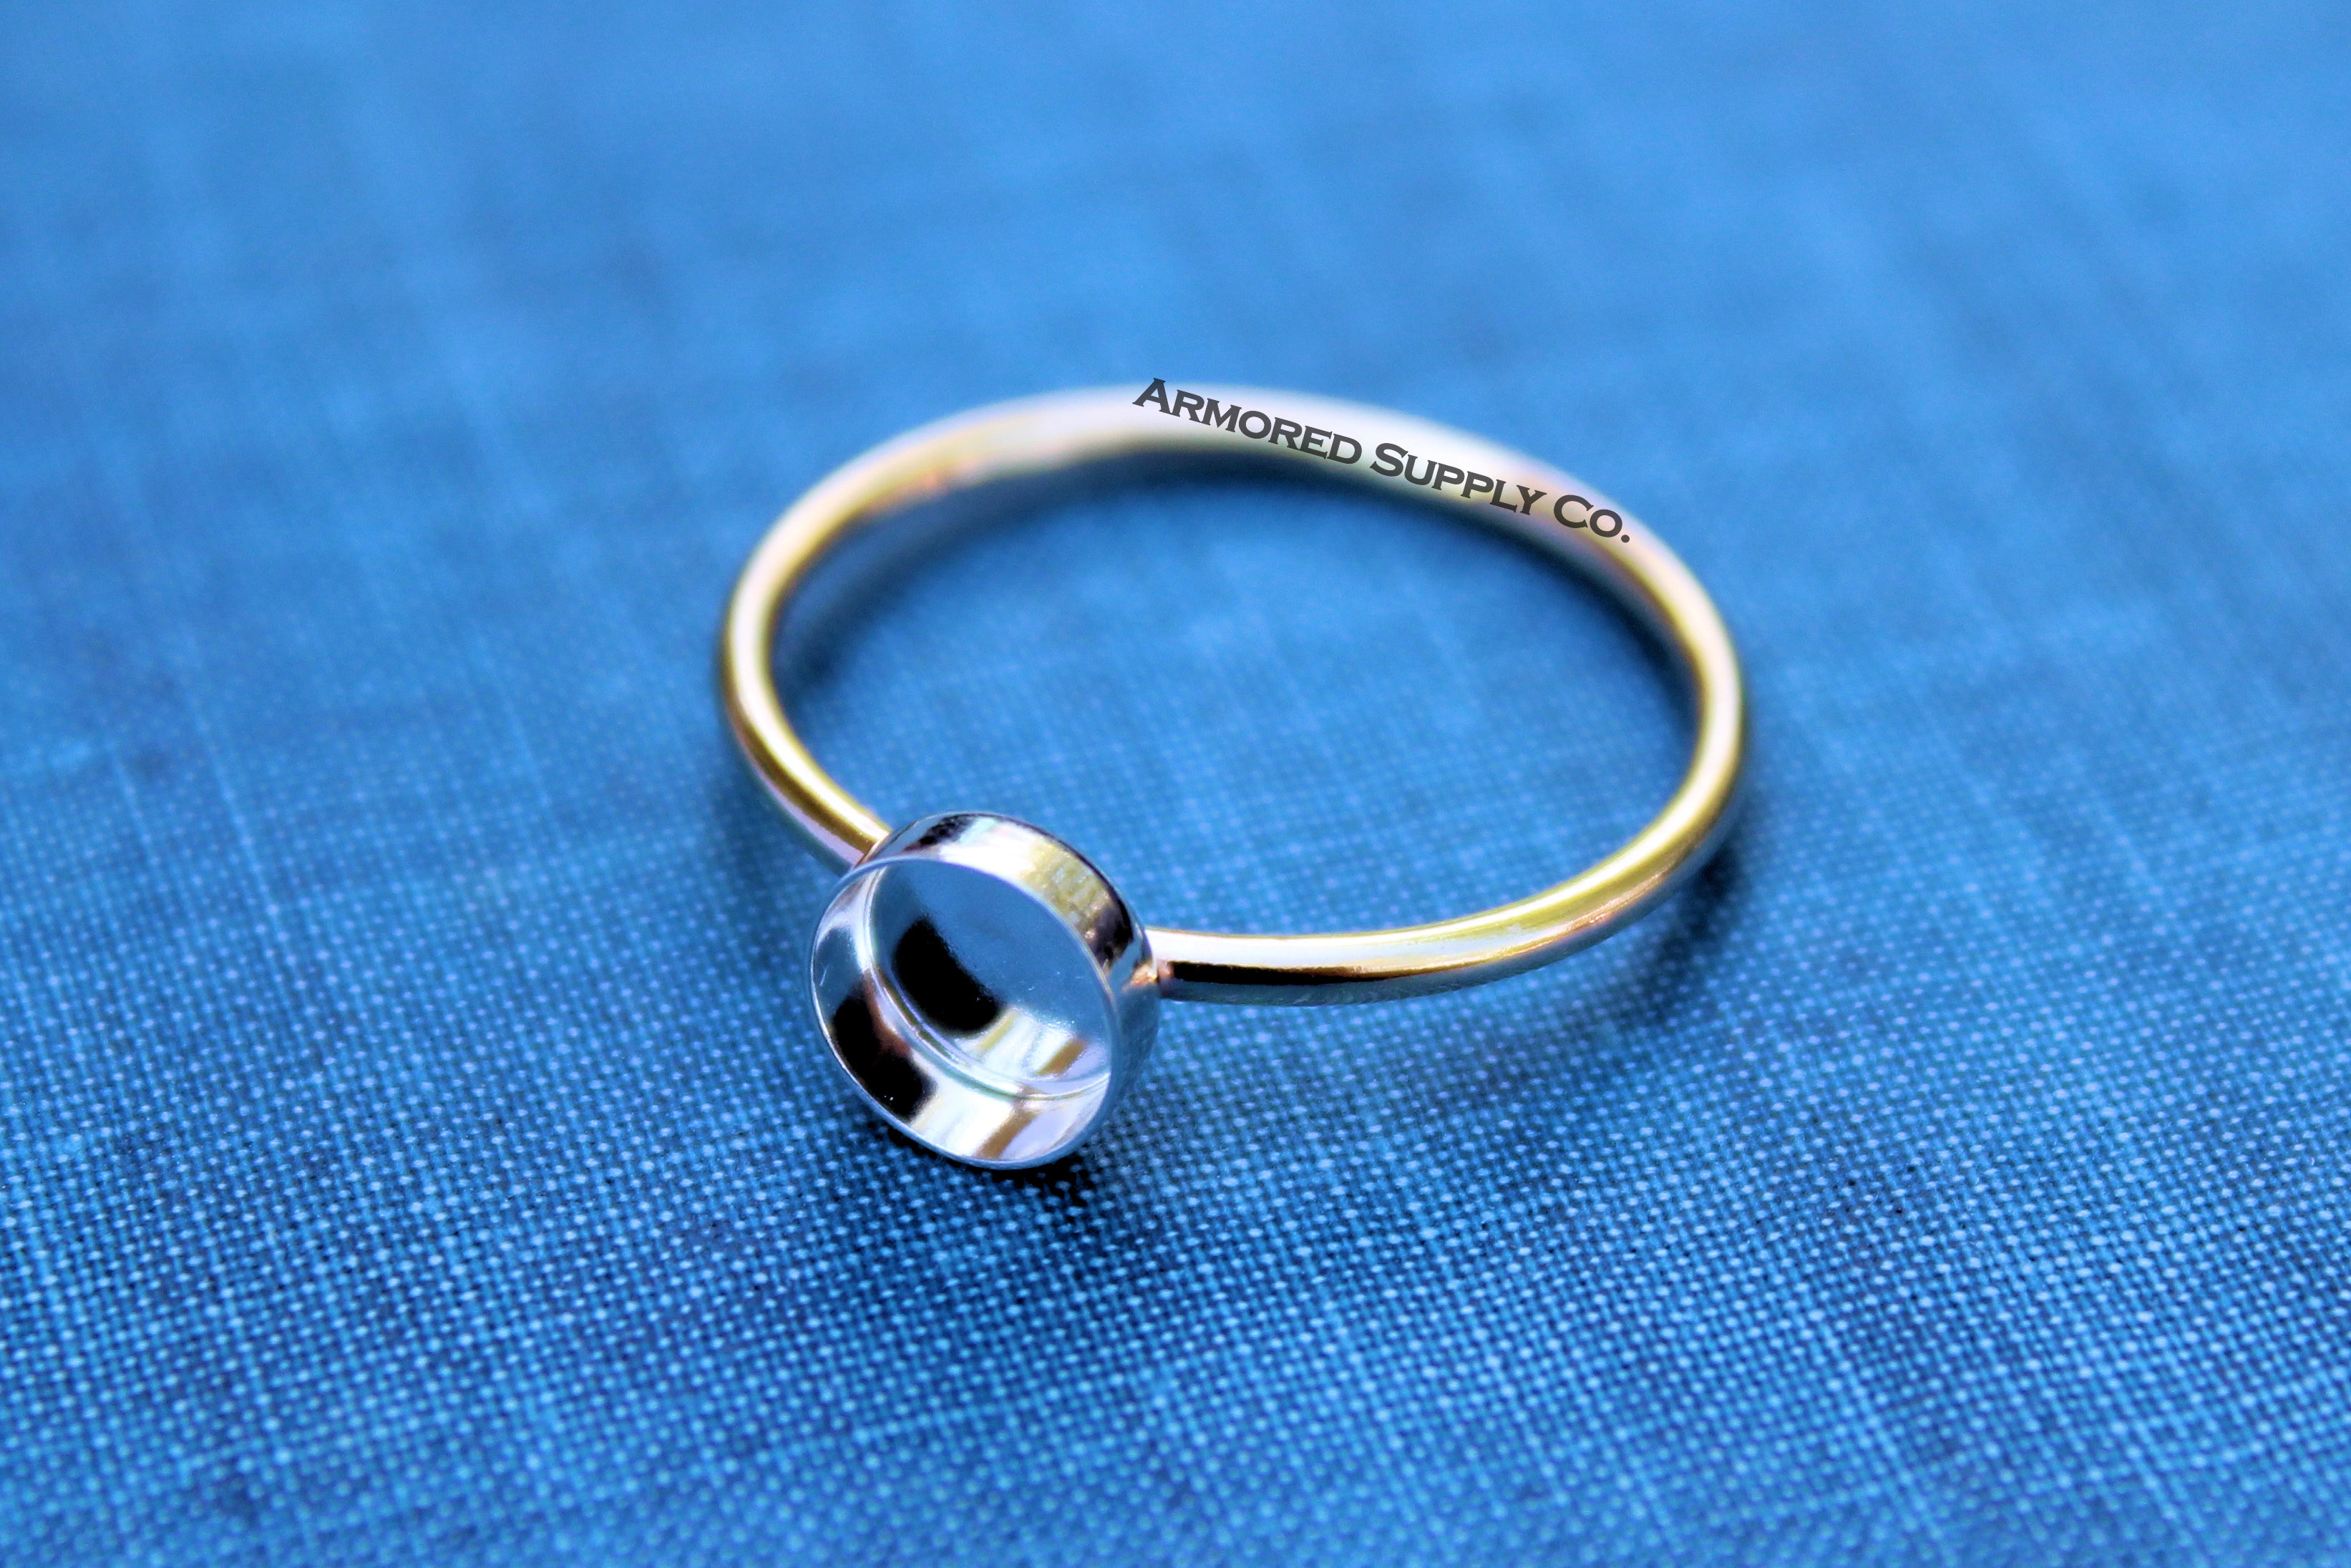 MIXED METALS Gold & Silver 4mm Plain Round Bezel Ring Blank